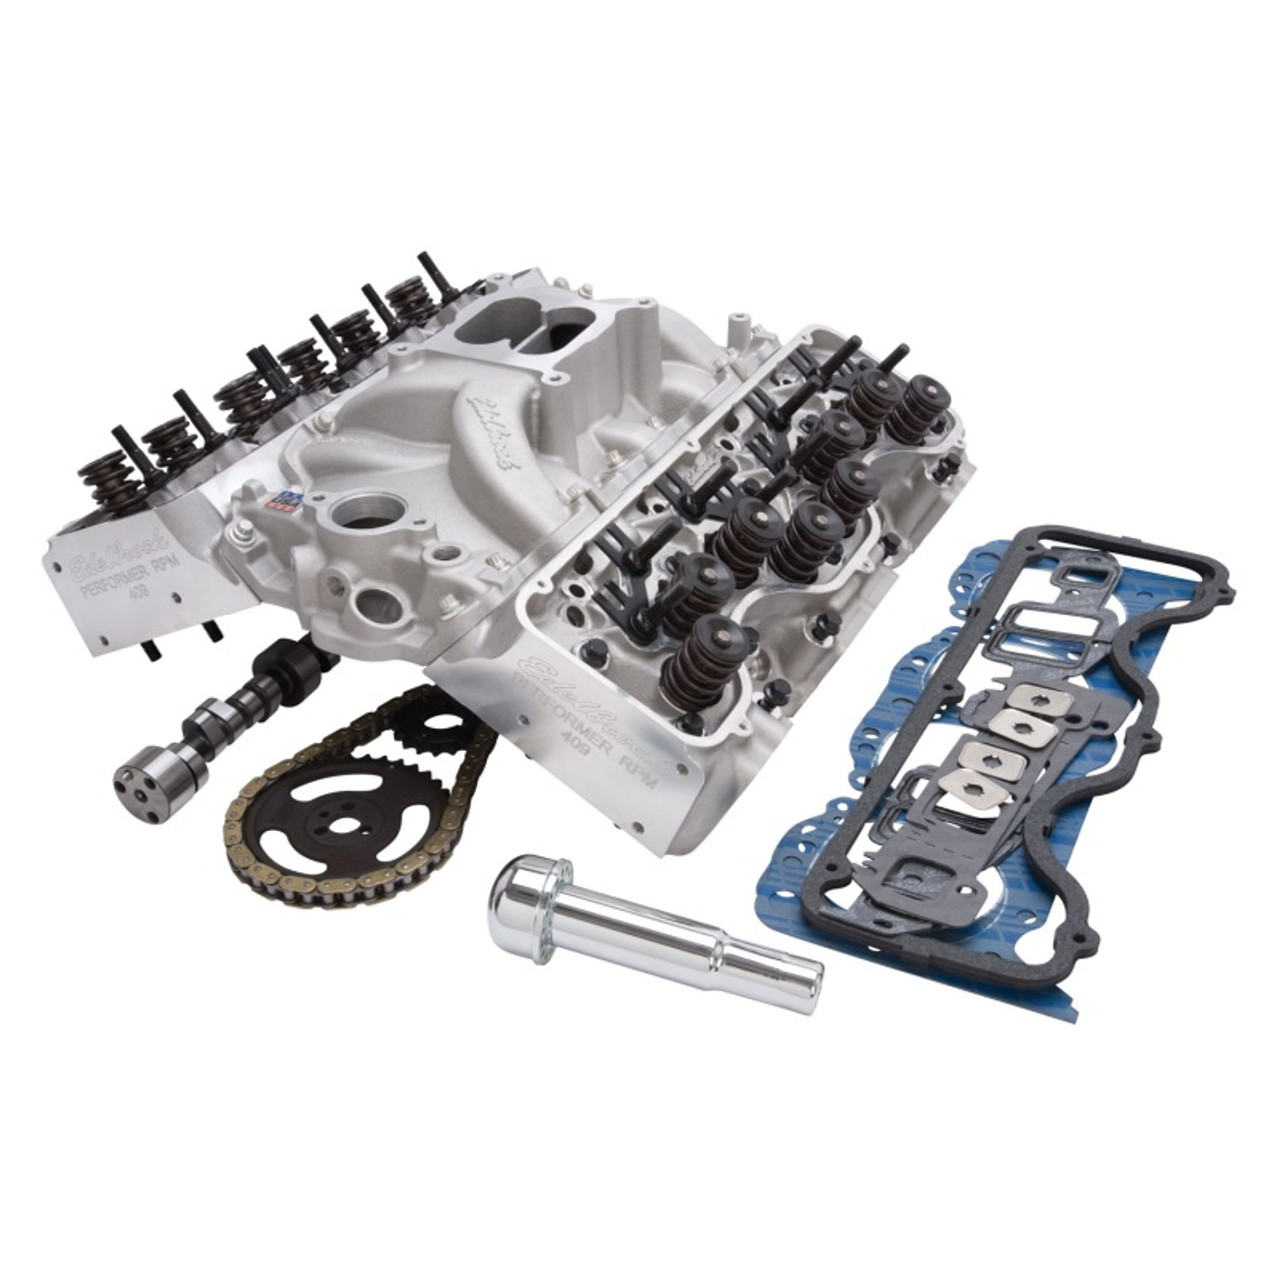 Edelbrock Power Package Top End Kit Performer RPM 348-409 BB Chevy